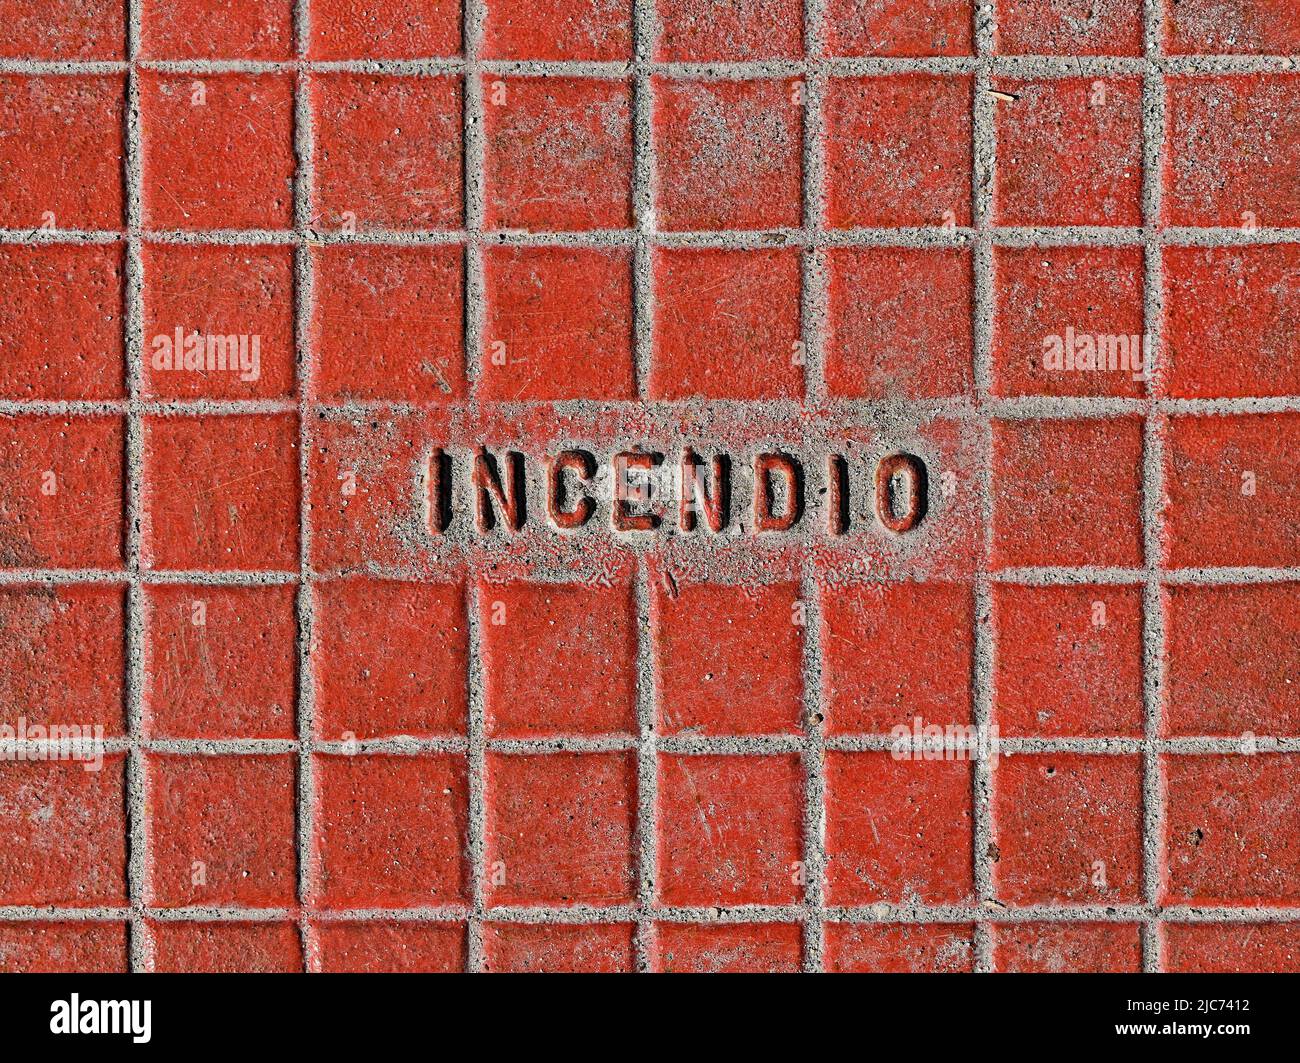 Metallic surface for access to the hydraulic system against fire (detail) with portuguese word that mean FIRE (Incendio) Stock Photo